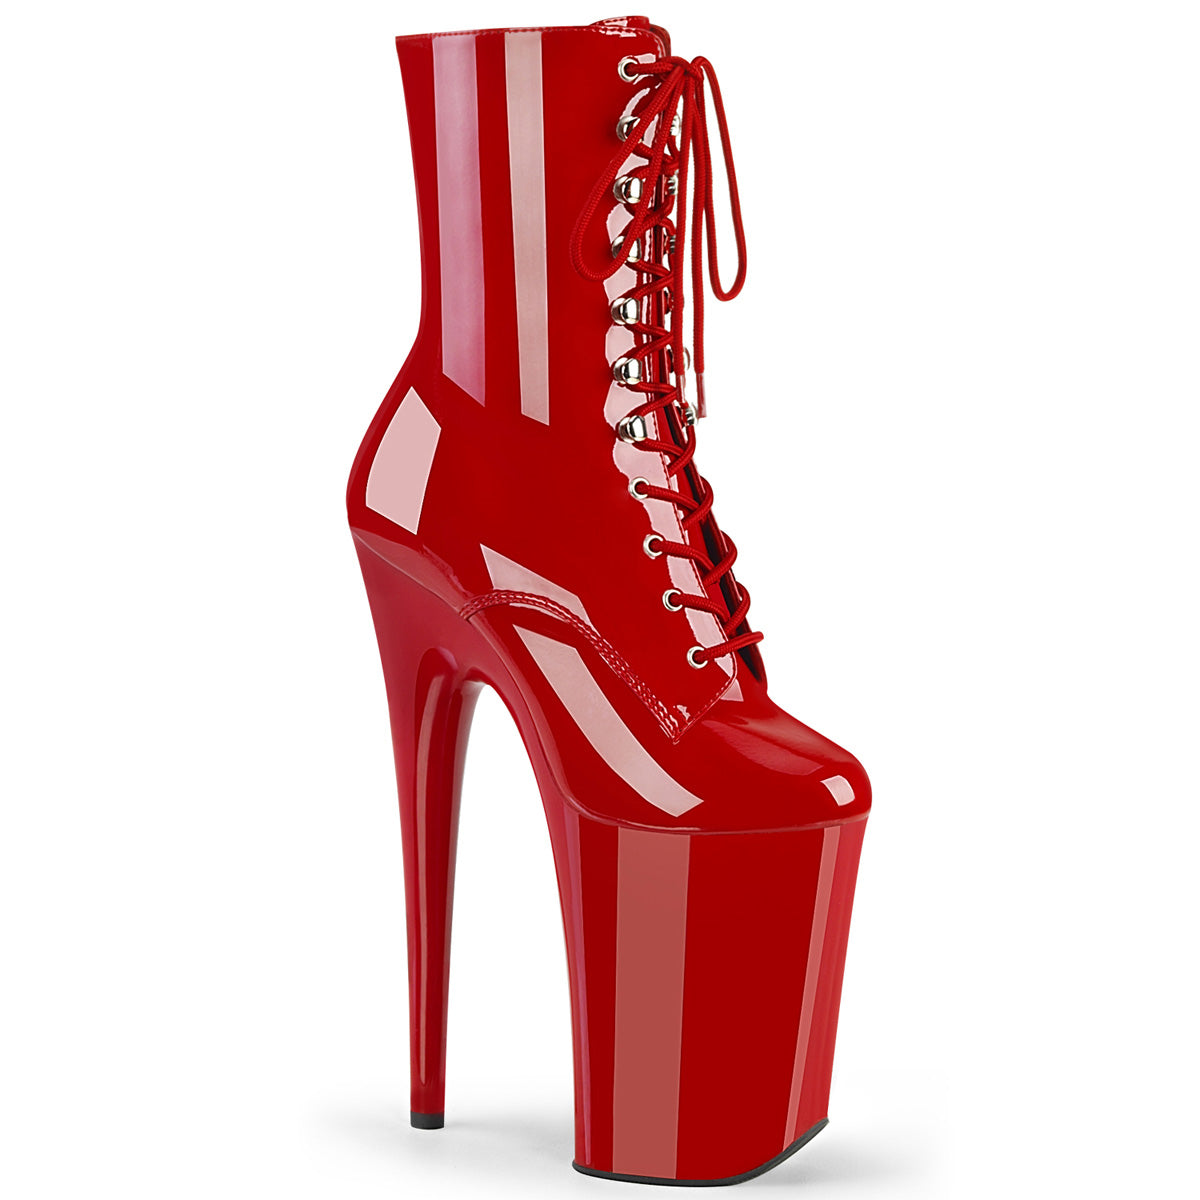 INFINITY-1020 Calf High Boots Red Multi view 1